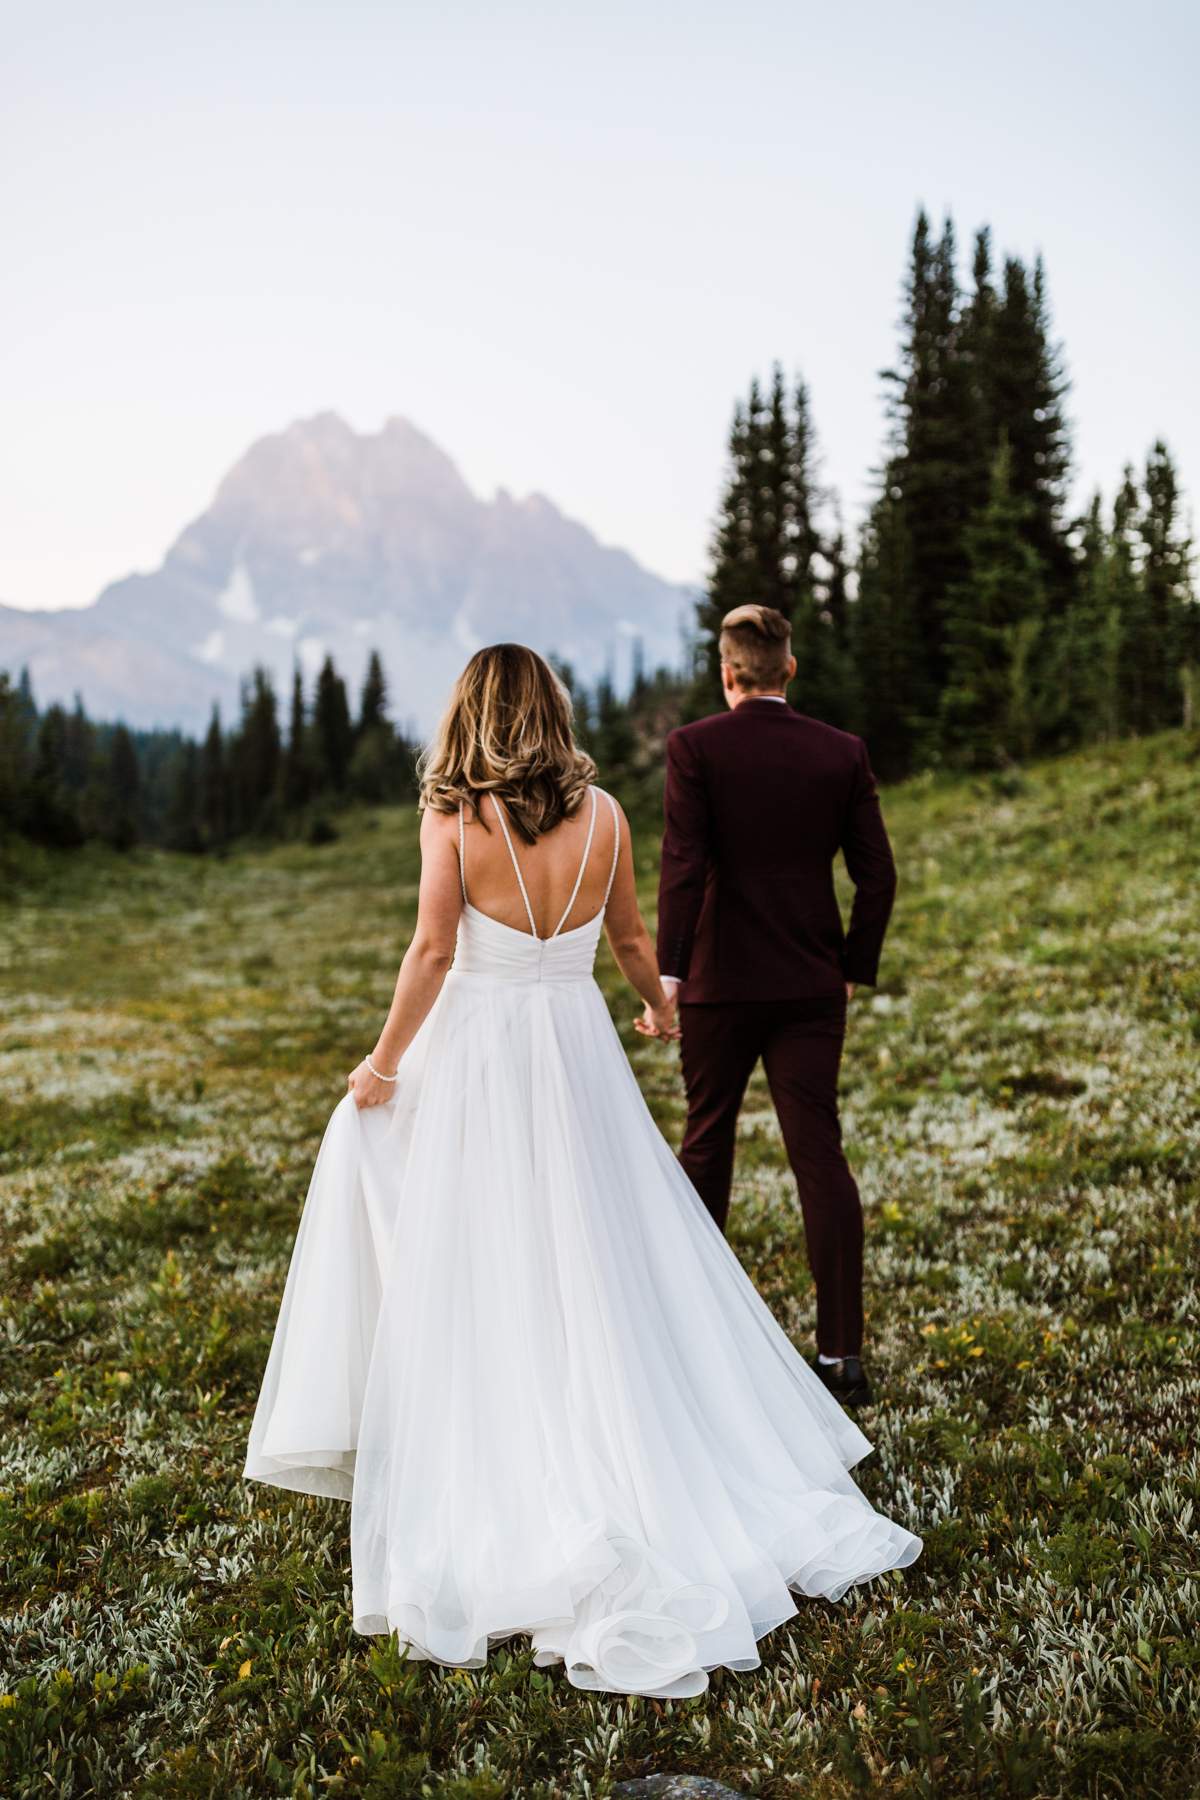 Banff Helicopter Elopement Photographers - Image 16